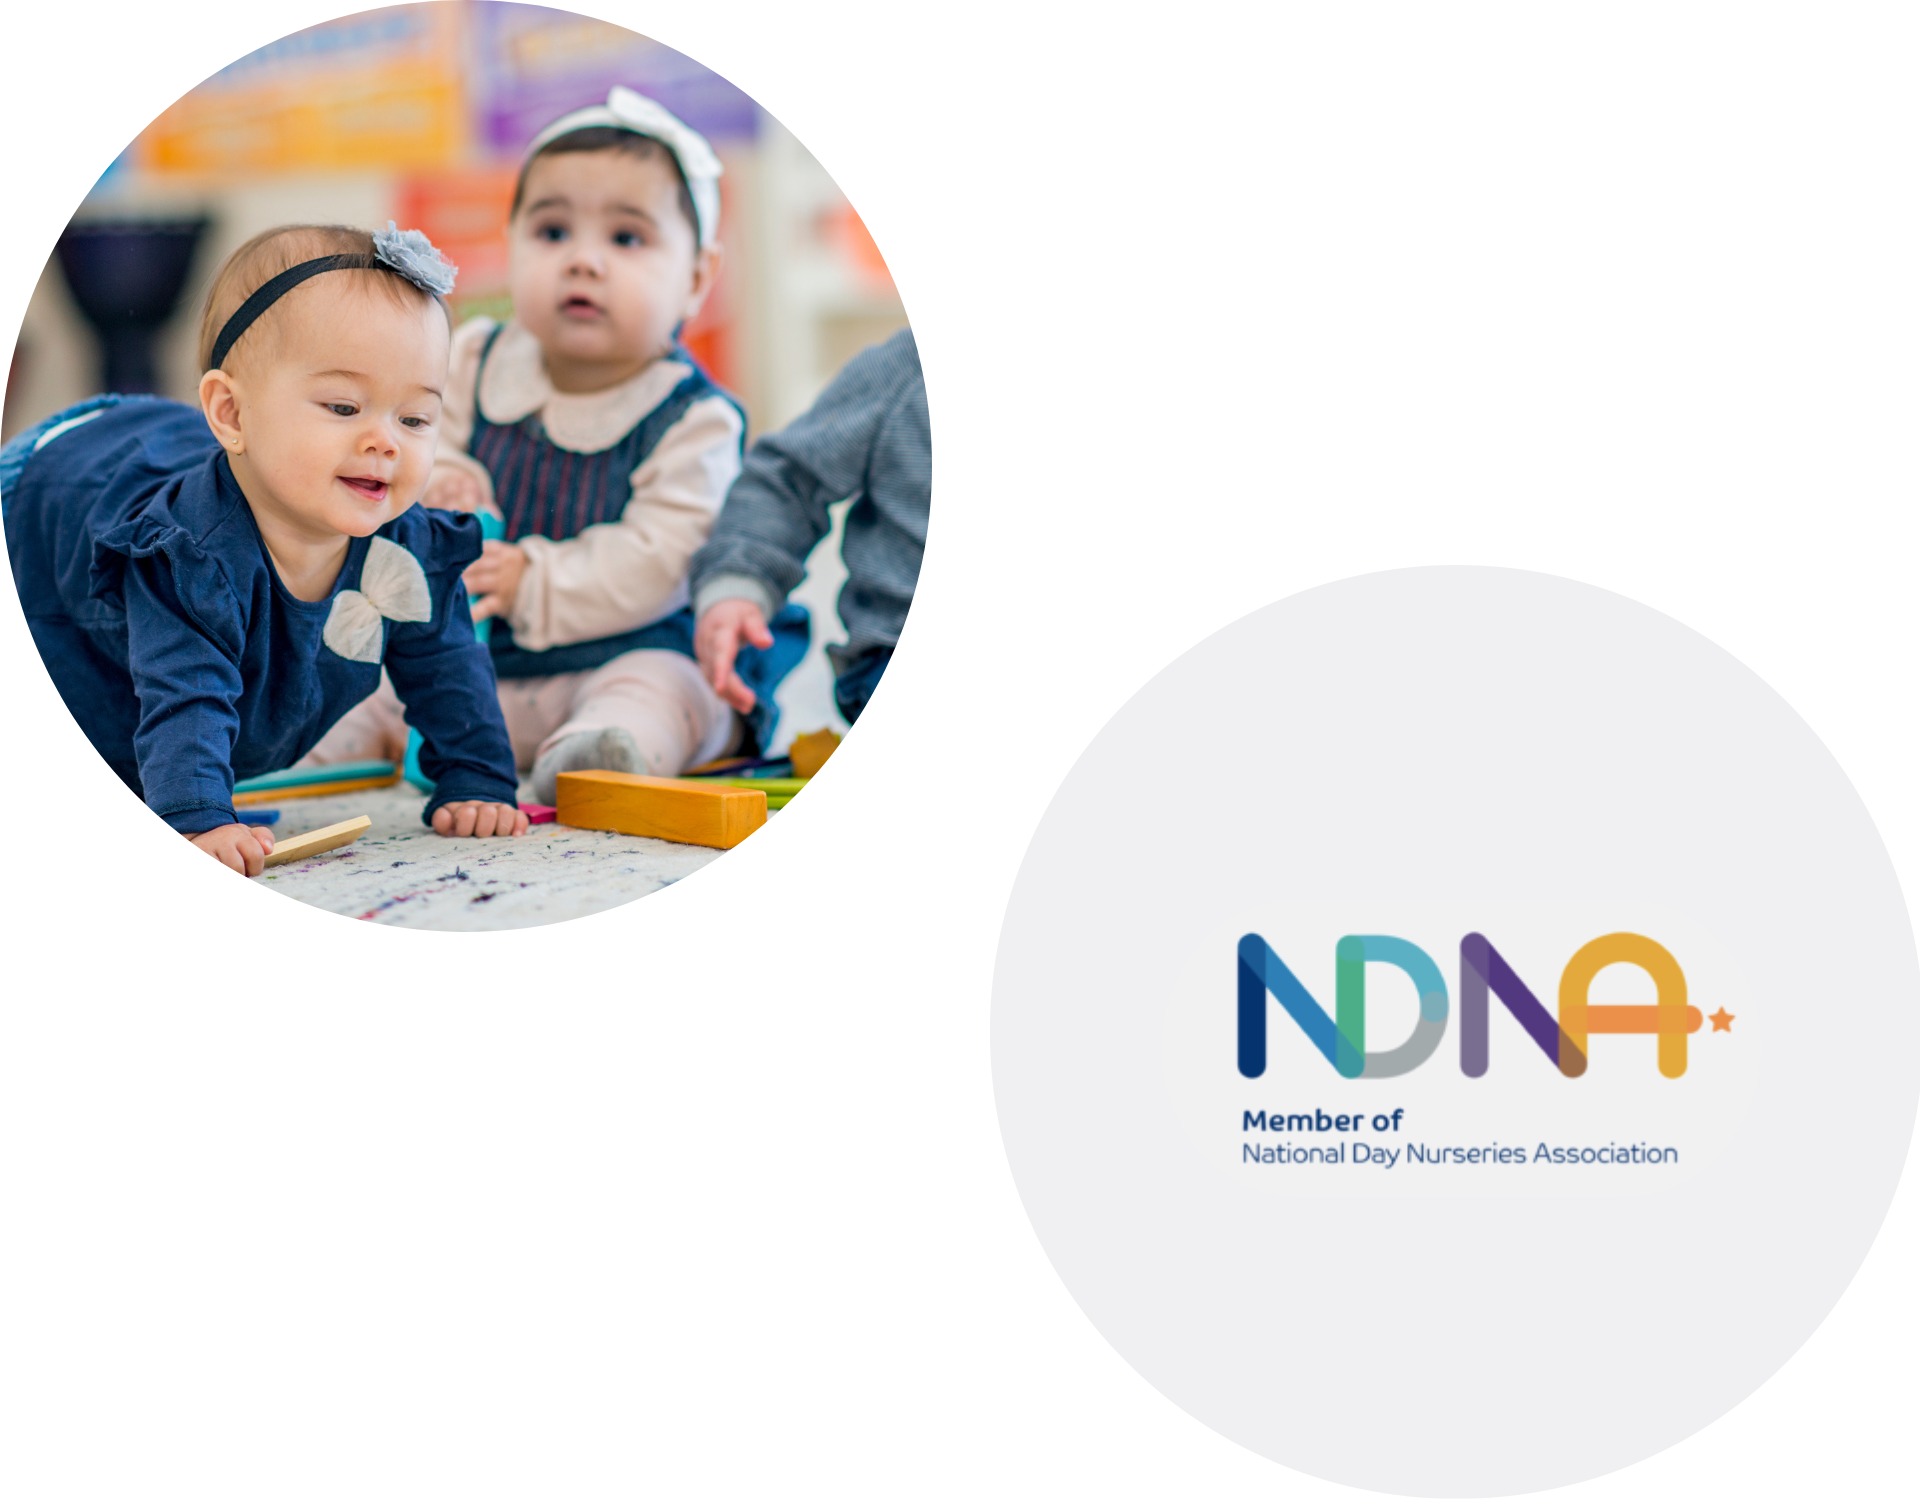 Two circular images show the National Day Nurseries Association and a baby girl drawing while another one is sitting in the background.